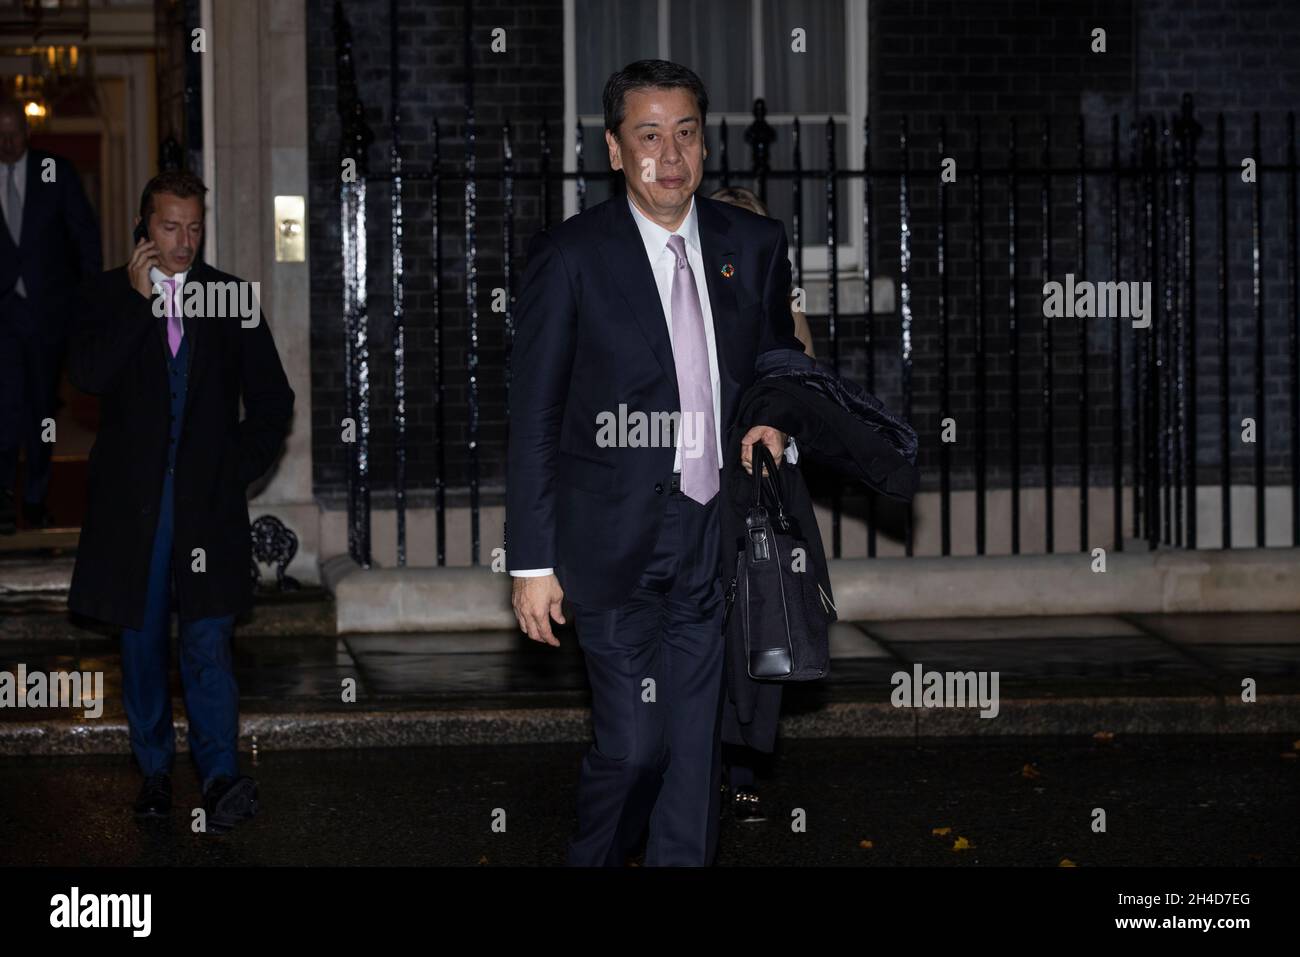 Prime Minister invites world’s top business leaders including Nissan CEO Makoto Uchida to Downing Street in bid to establish 'Global Britain'. Stock Photo